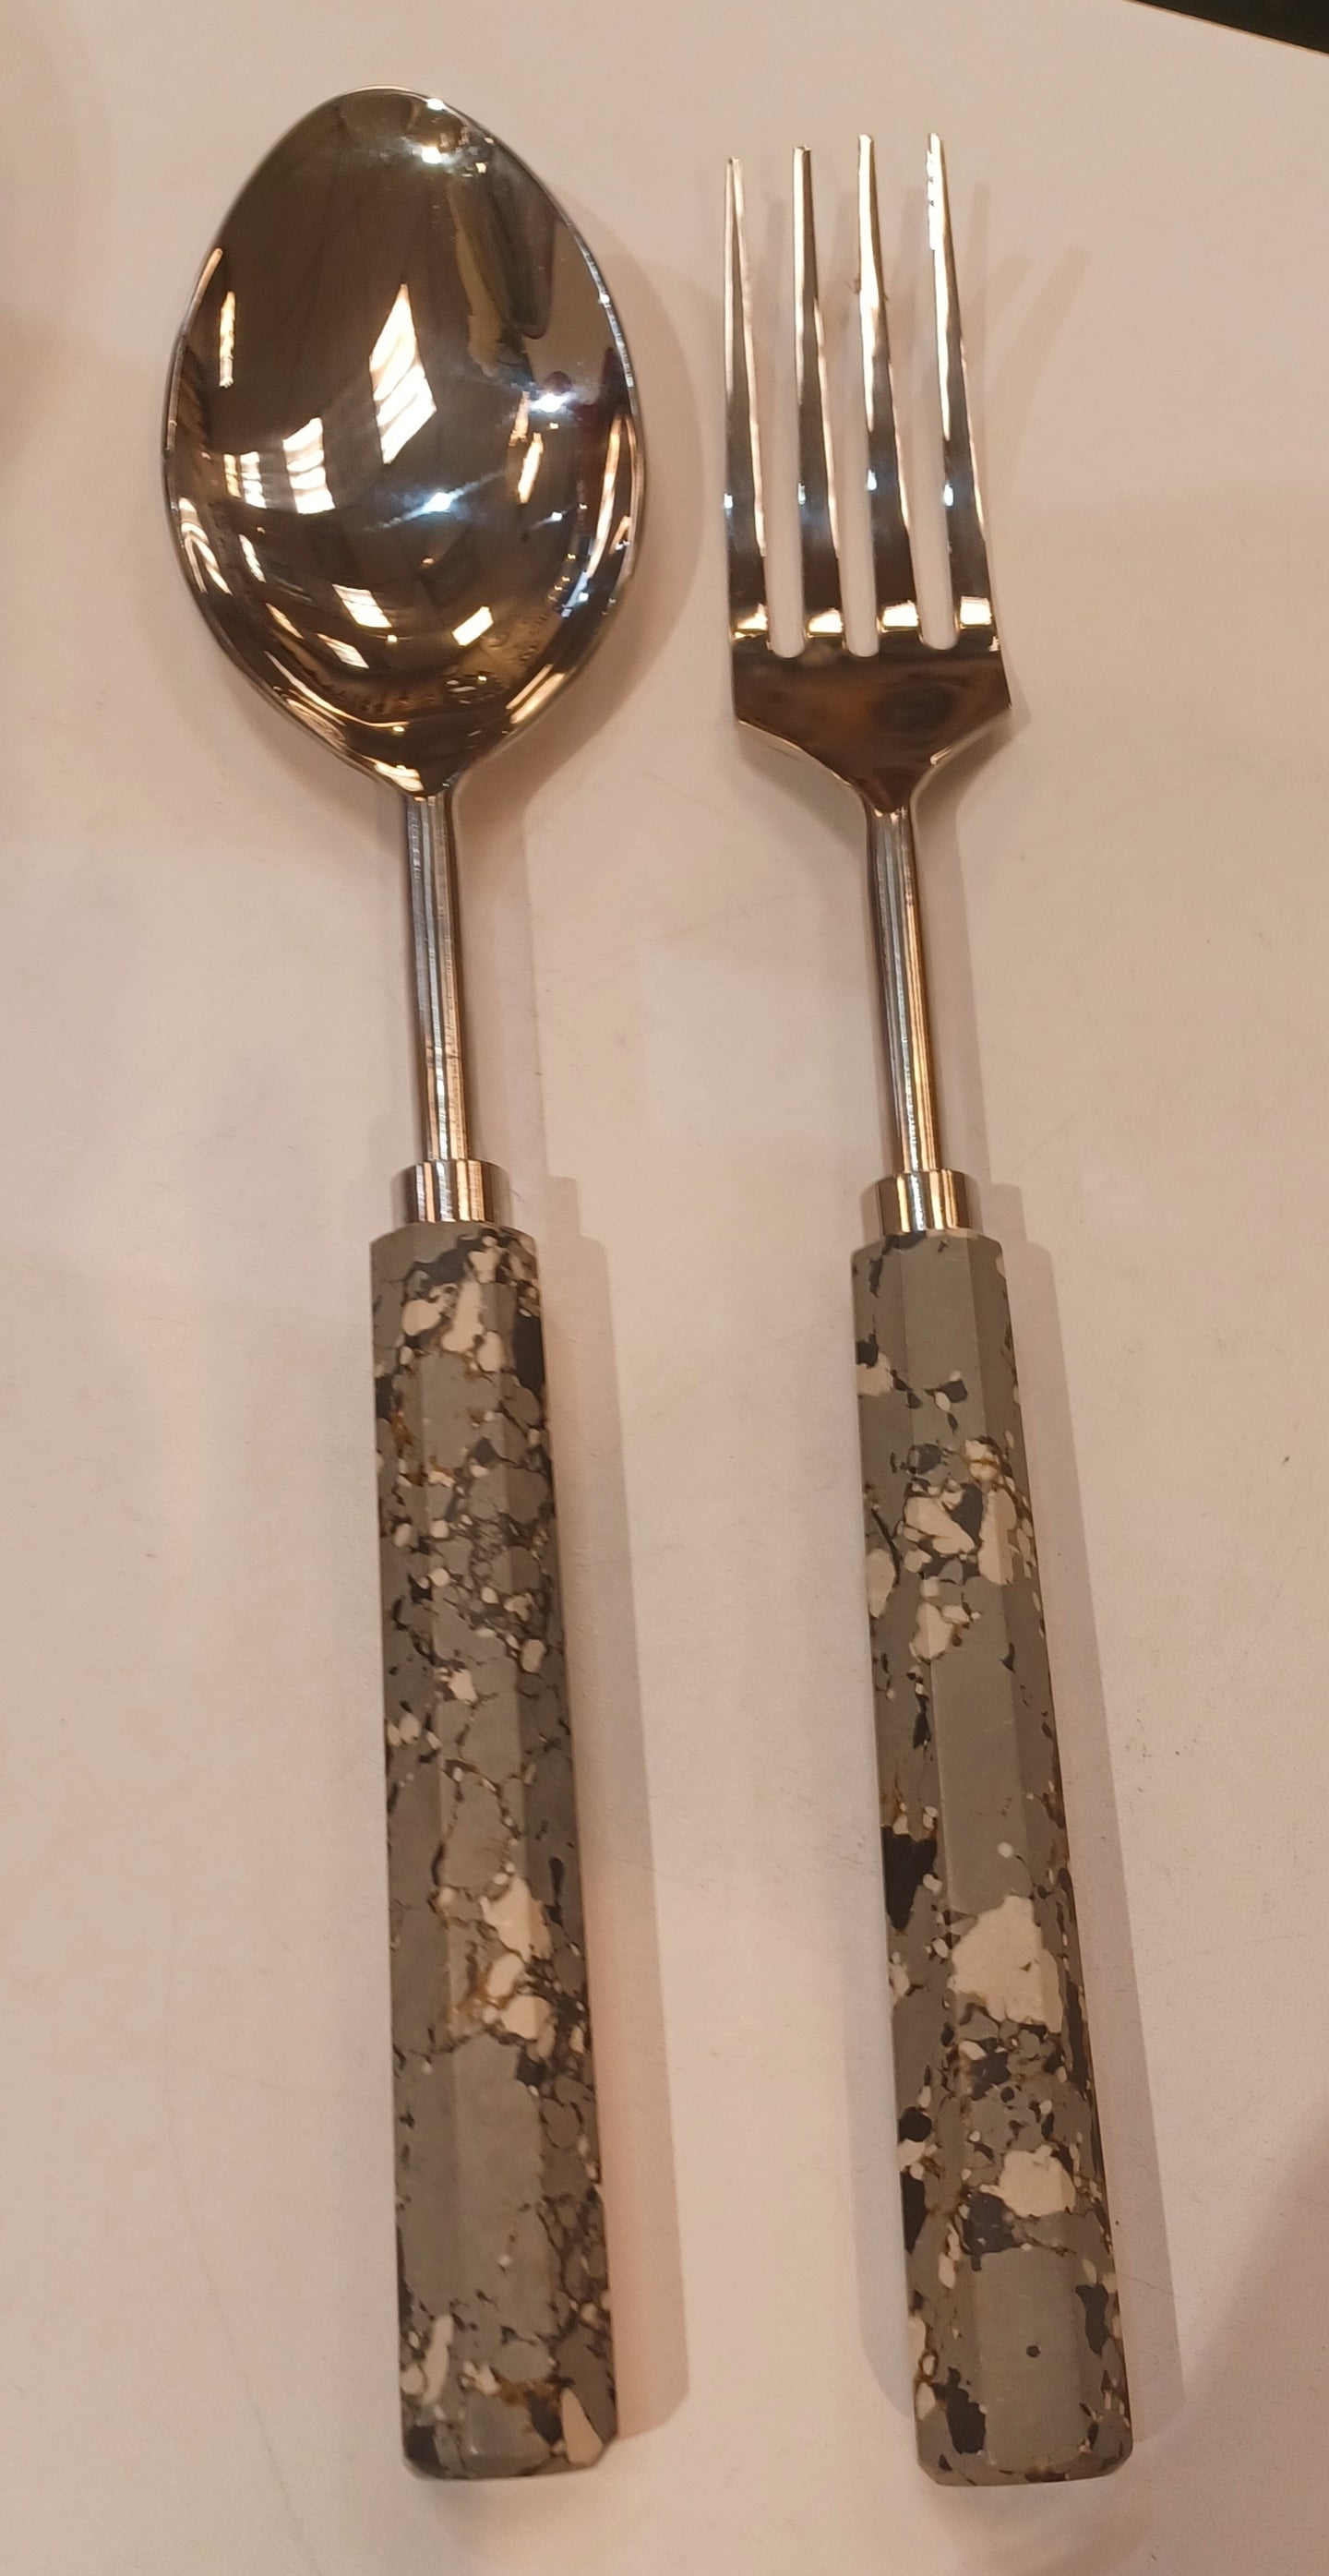 Primitive Artisan Resin and Stainless Steel Salad Servers